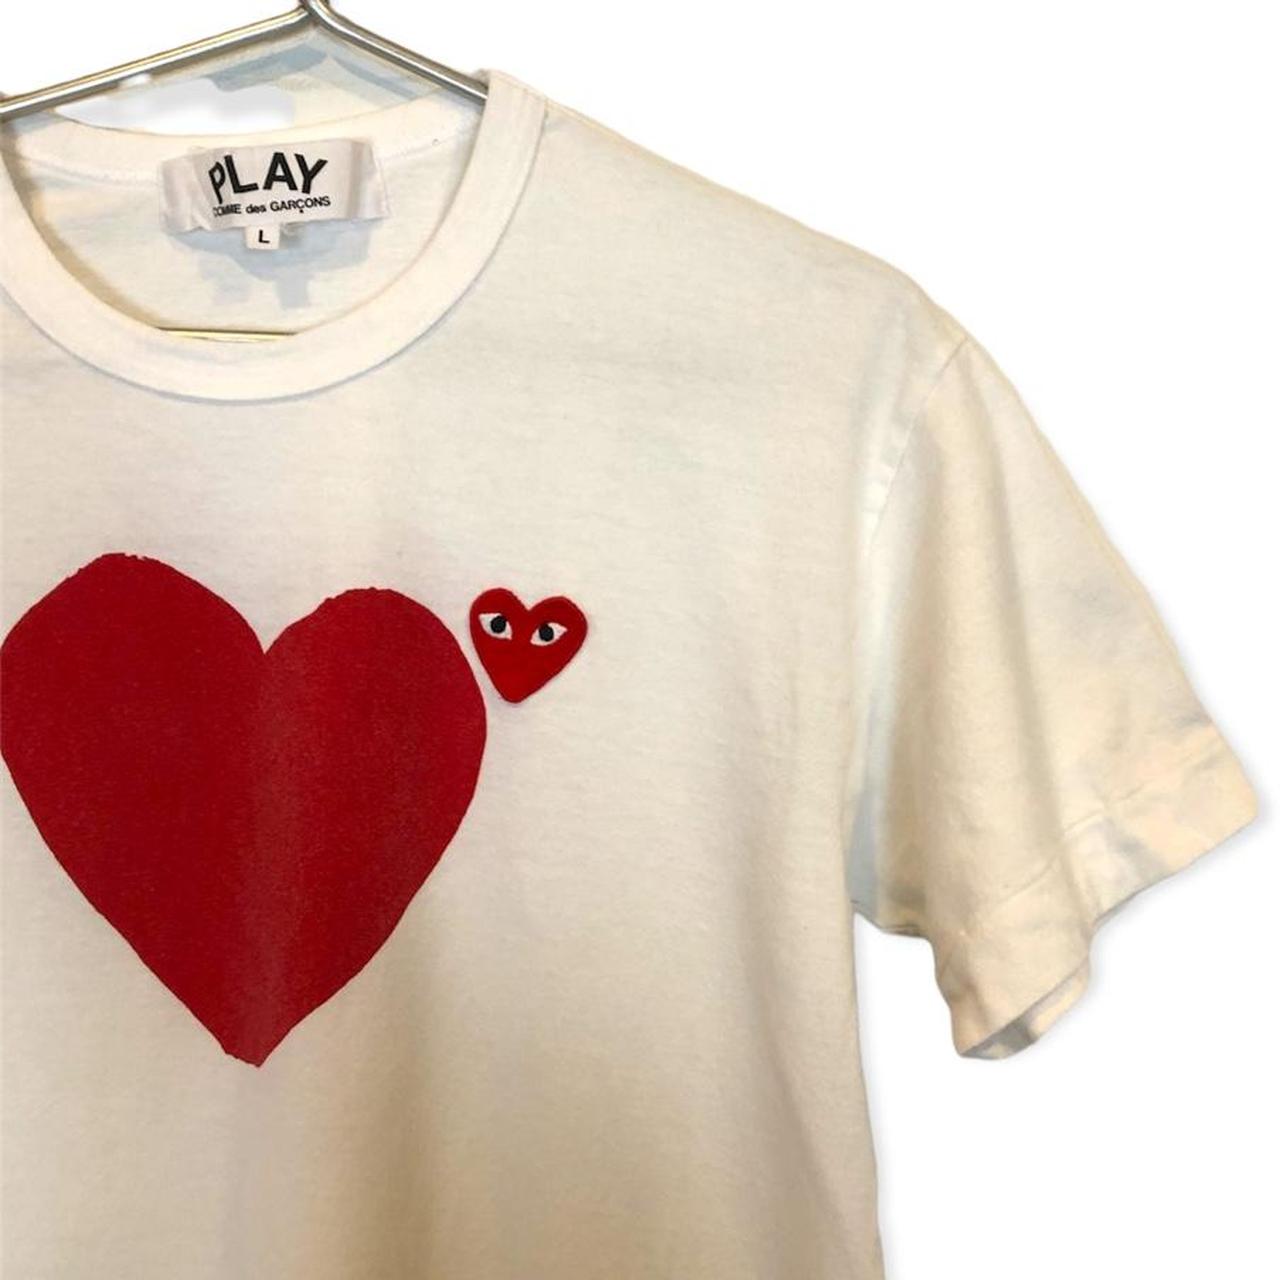 Comme des Garçons Play Women's White and Red T-shirt (3)